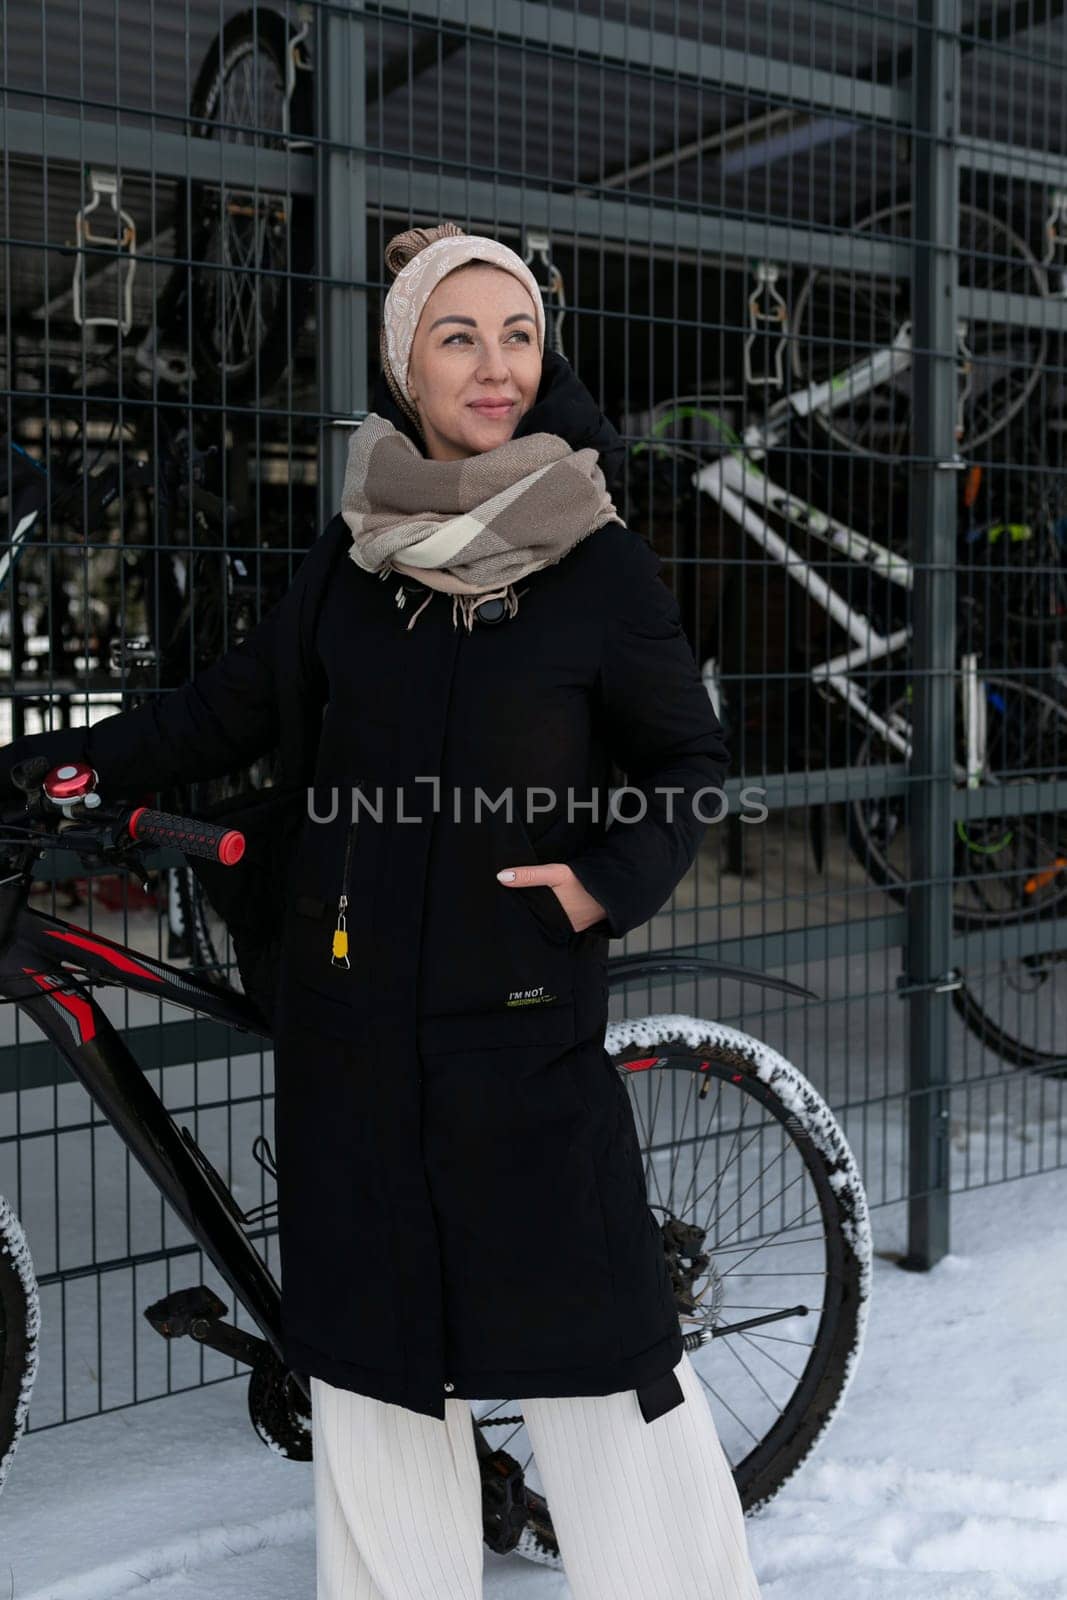 Smiling cute woman with blond dreadlocks rented a bicycle in winter by TRMK